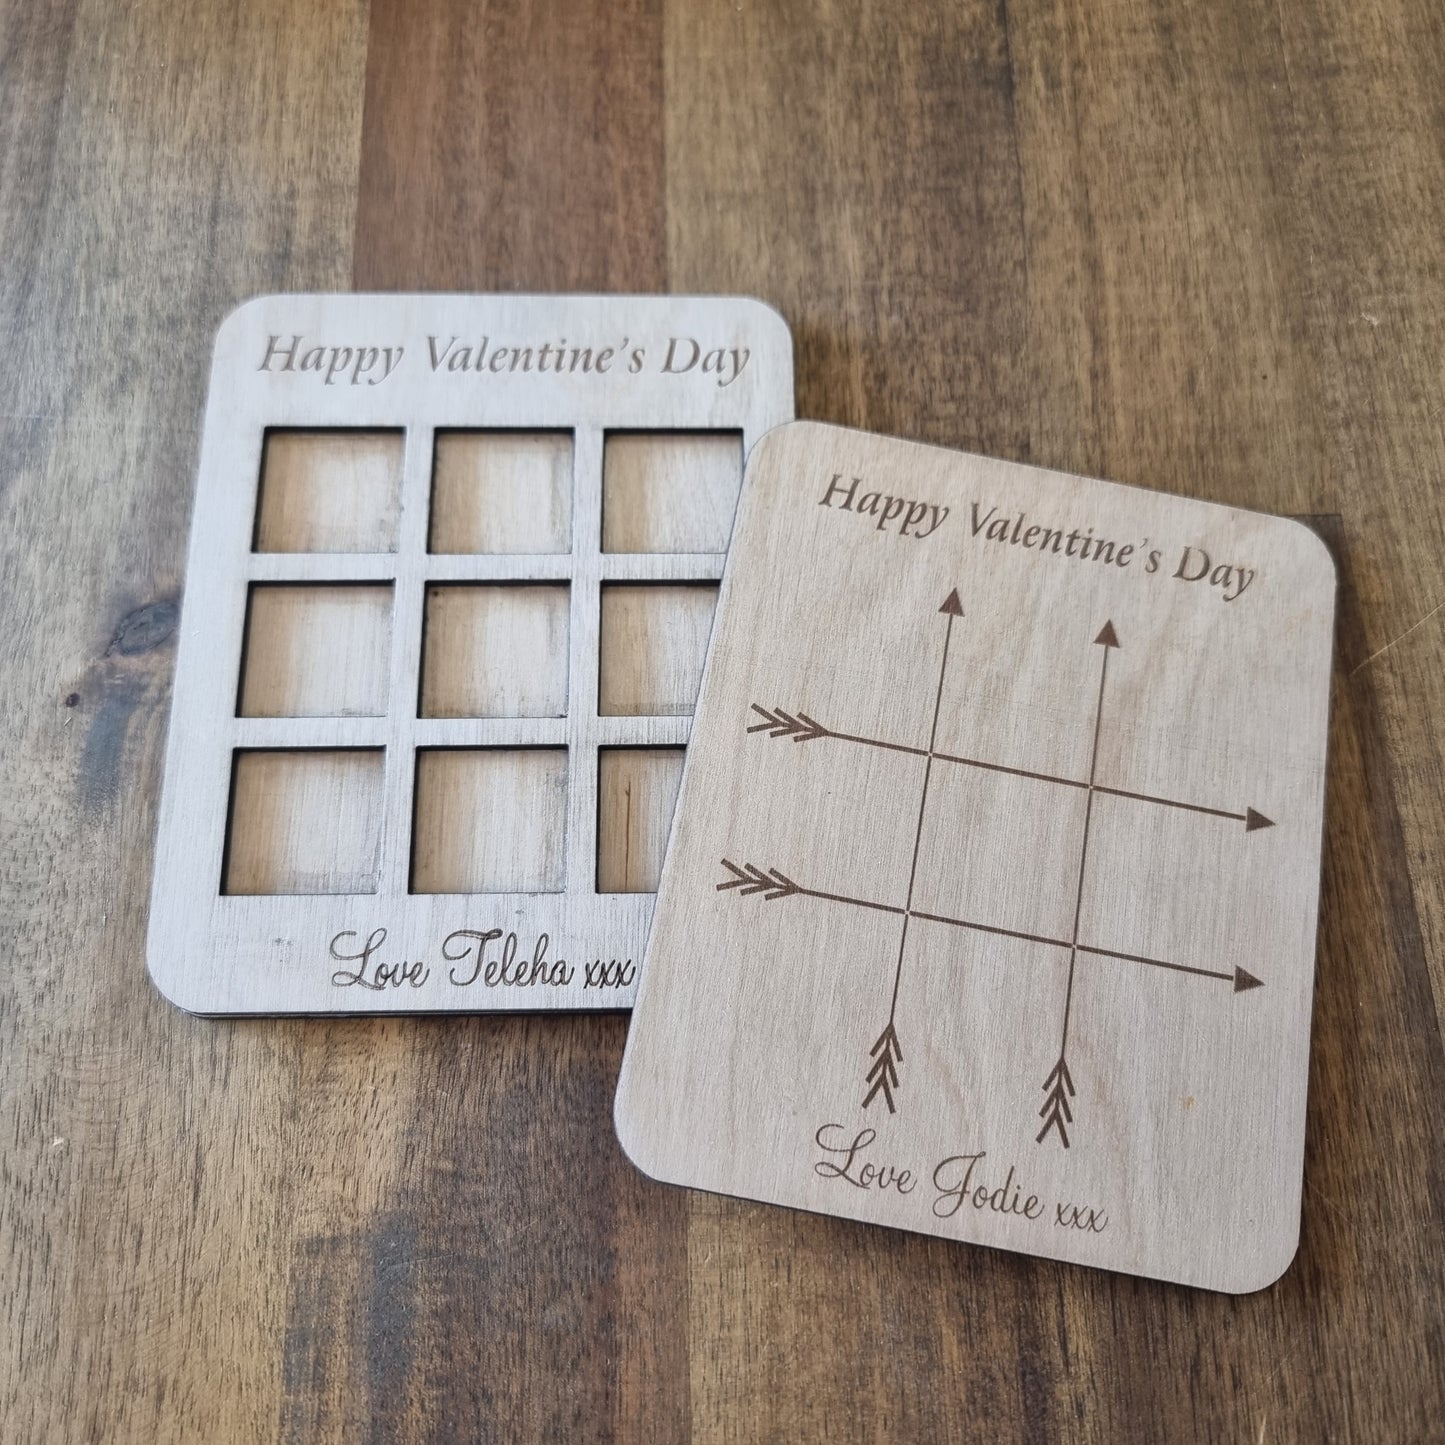 Tic Tac Toe Noughts and Crosses - Gift set board